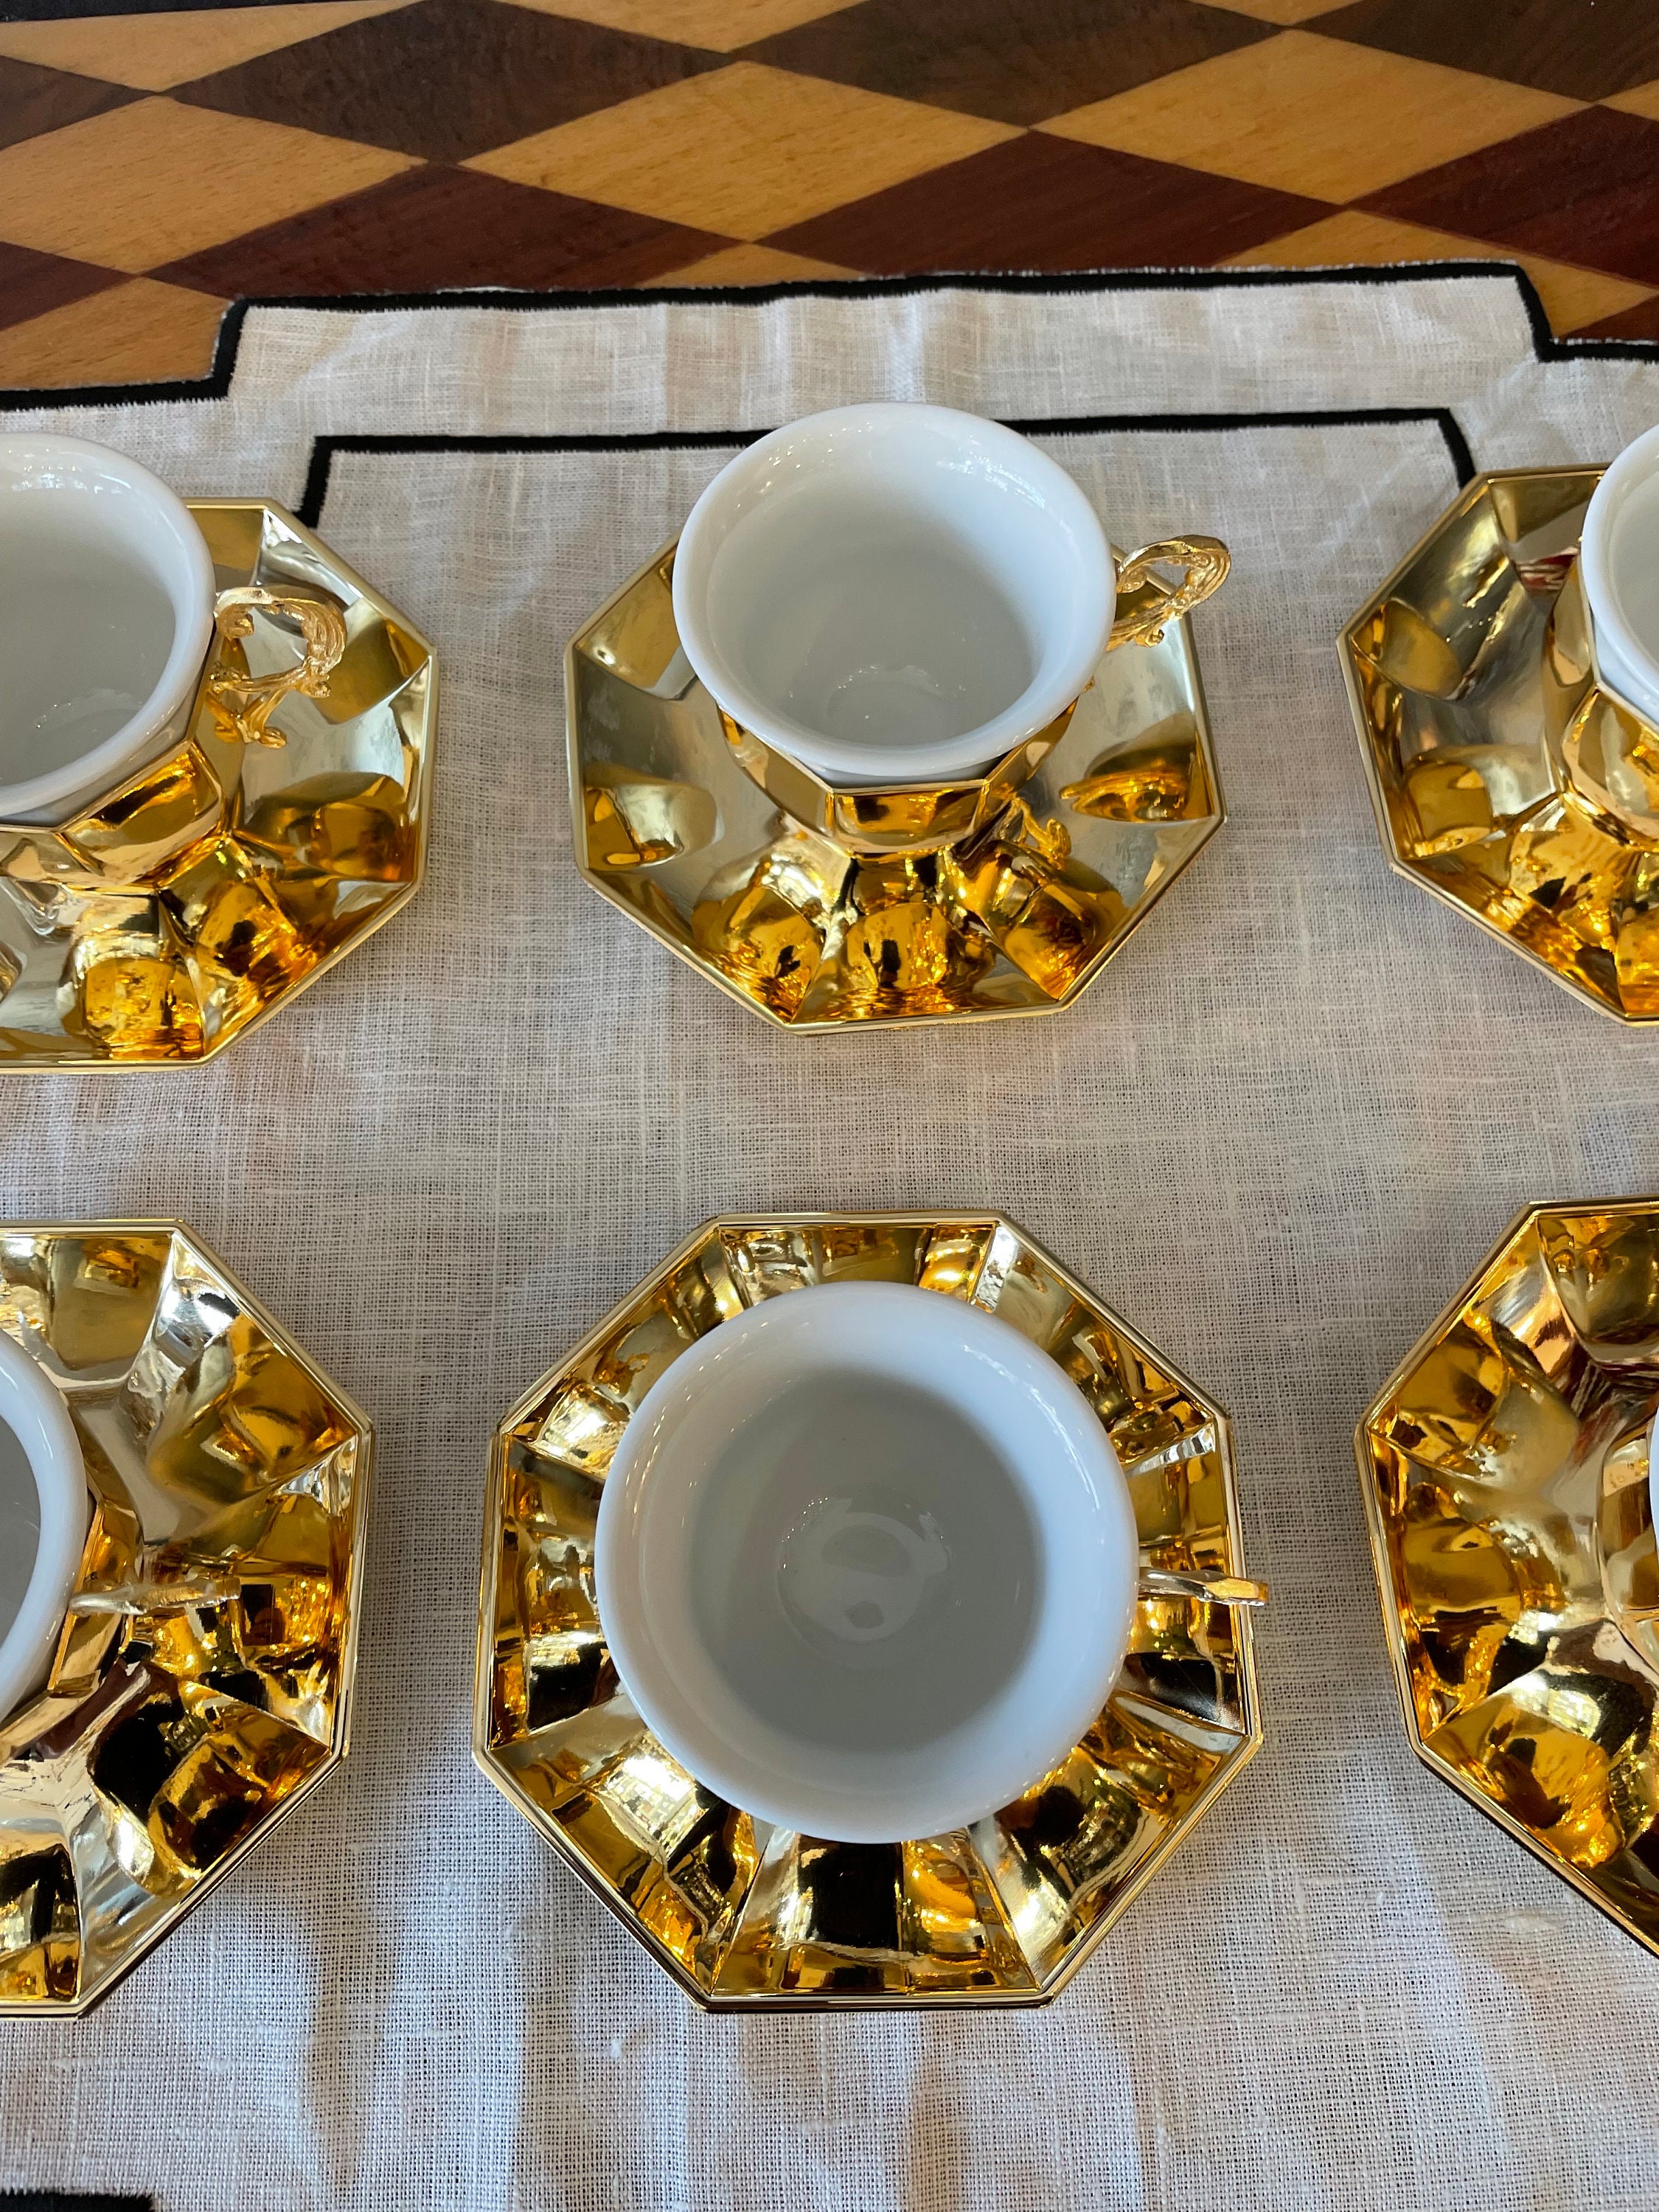 Coffee Cup Set of 6  Luxurious 18-Piece Handcrafted Porcelain